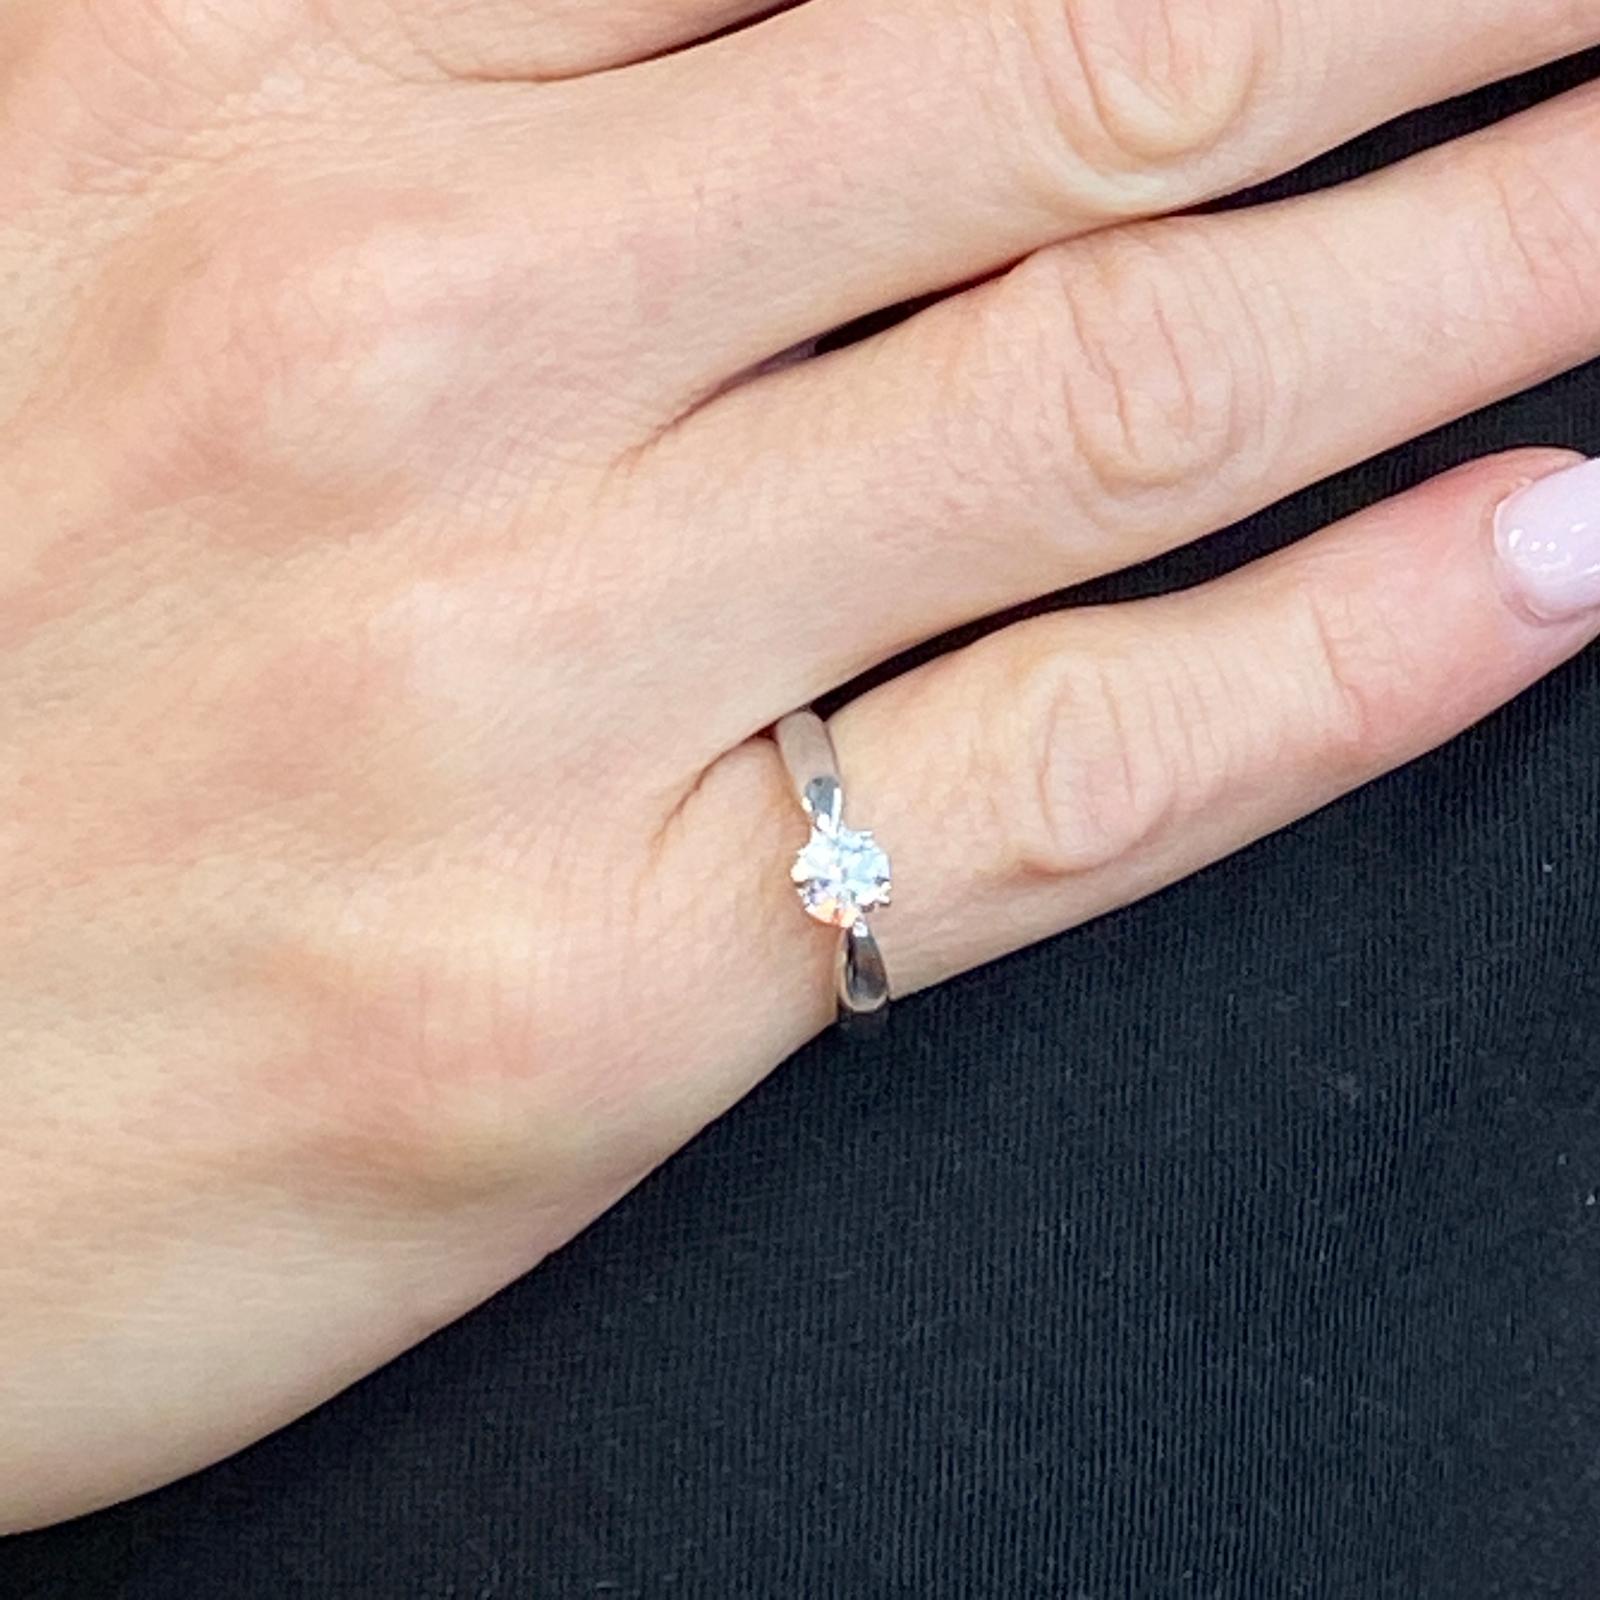 Tiffany & Co. Harmony diamond solitaire engagement ring fashioned in platinum. The round brilliant cut diamond weighs .38 carats and is graded H color and VVS clarity. The ring is signed Tiffany & Co. PT 950, numbered and is marked 0.38 CT.